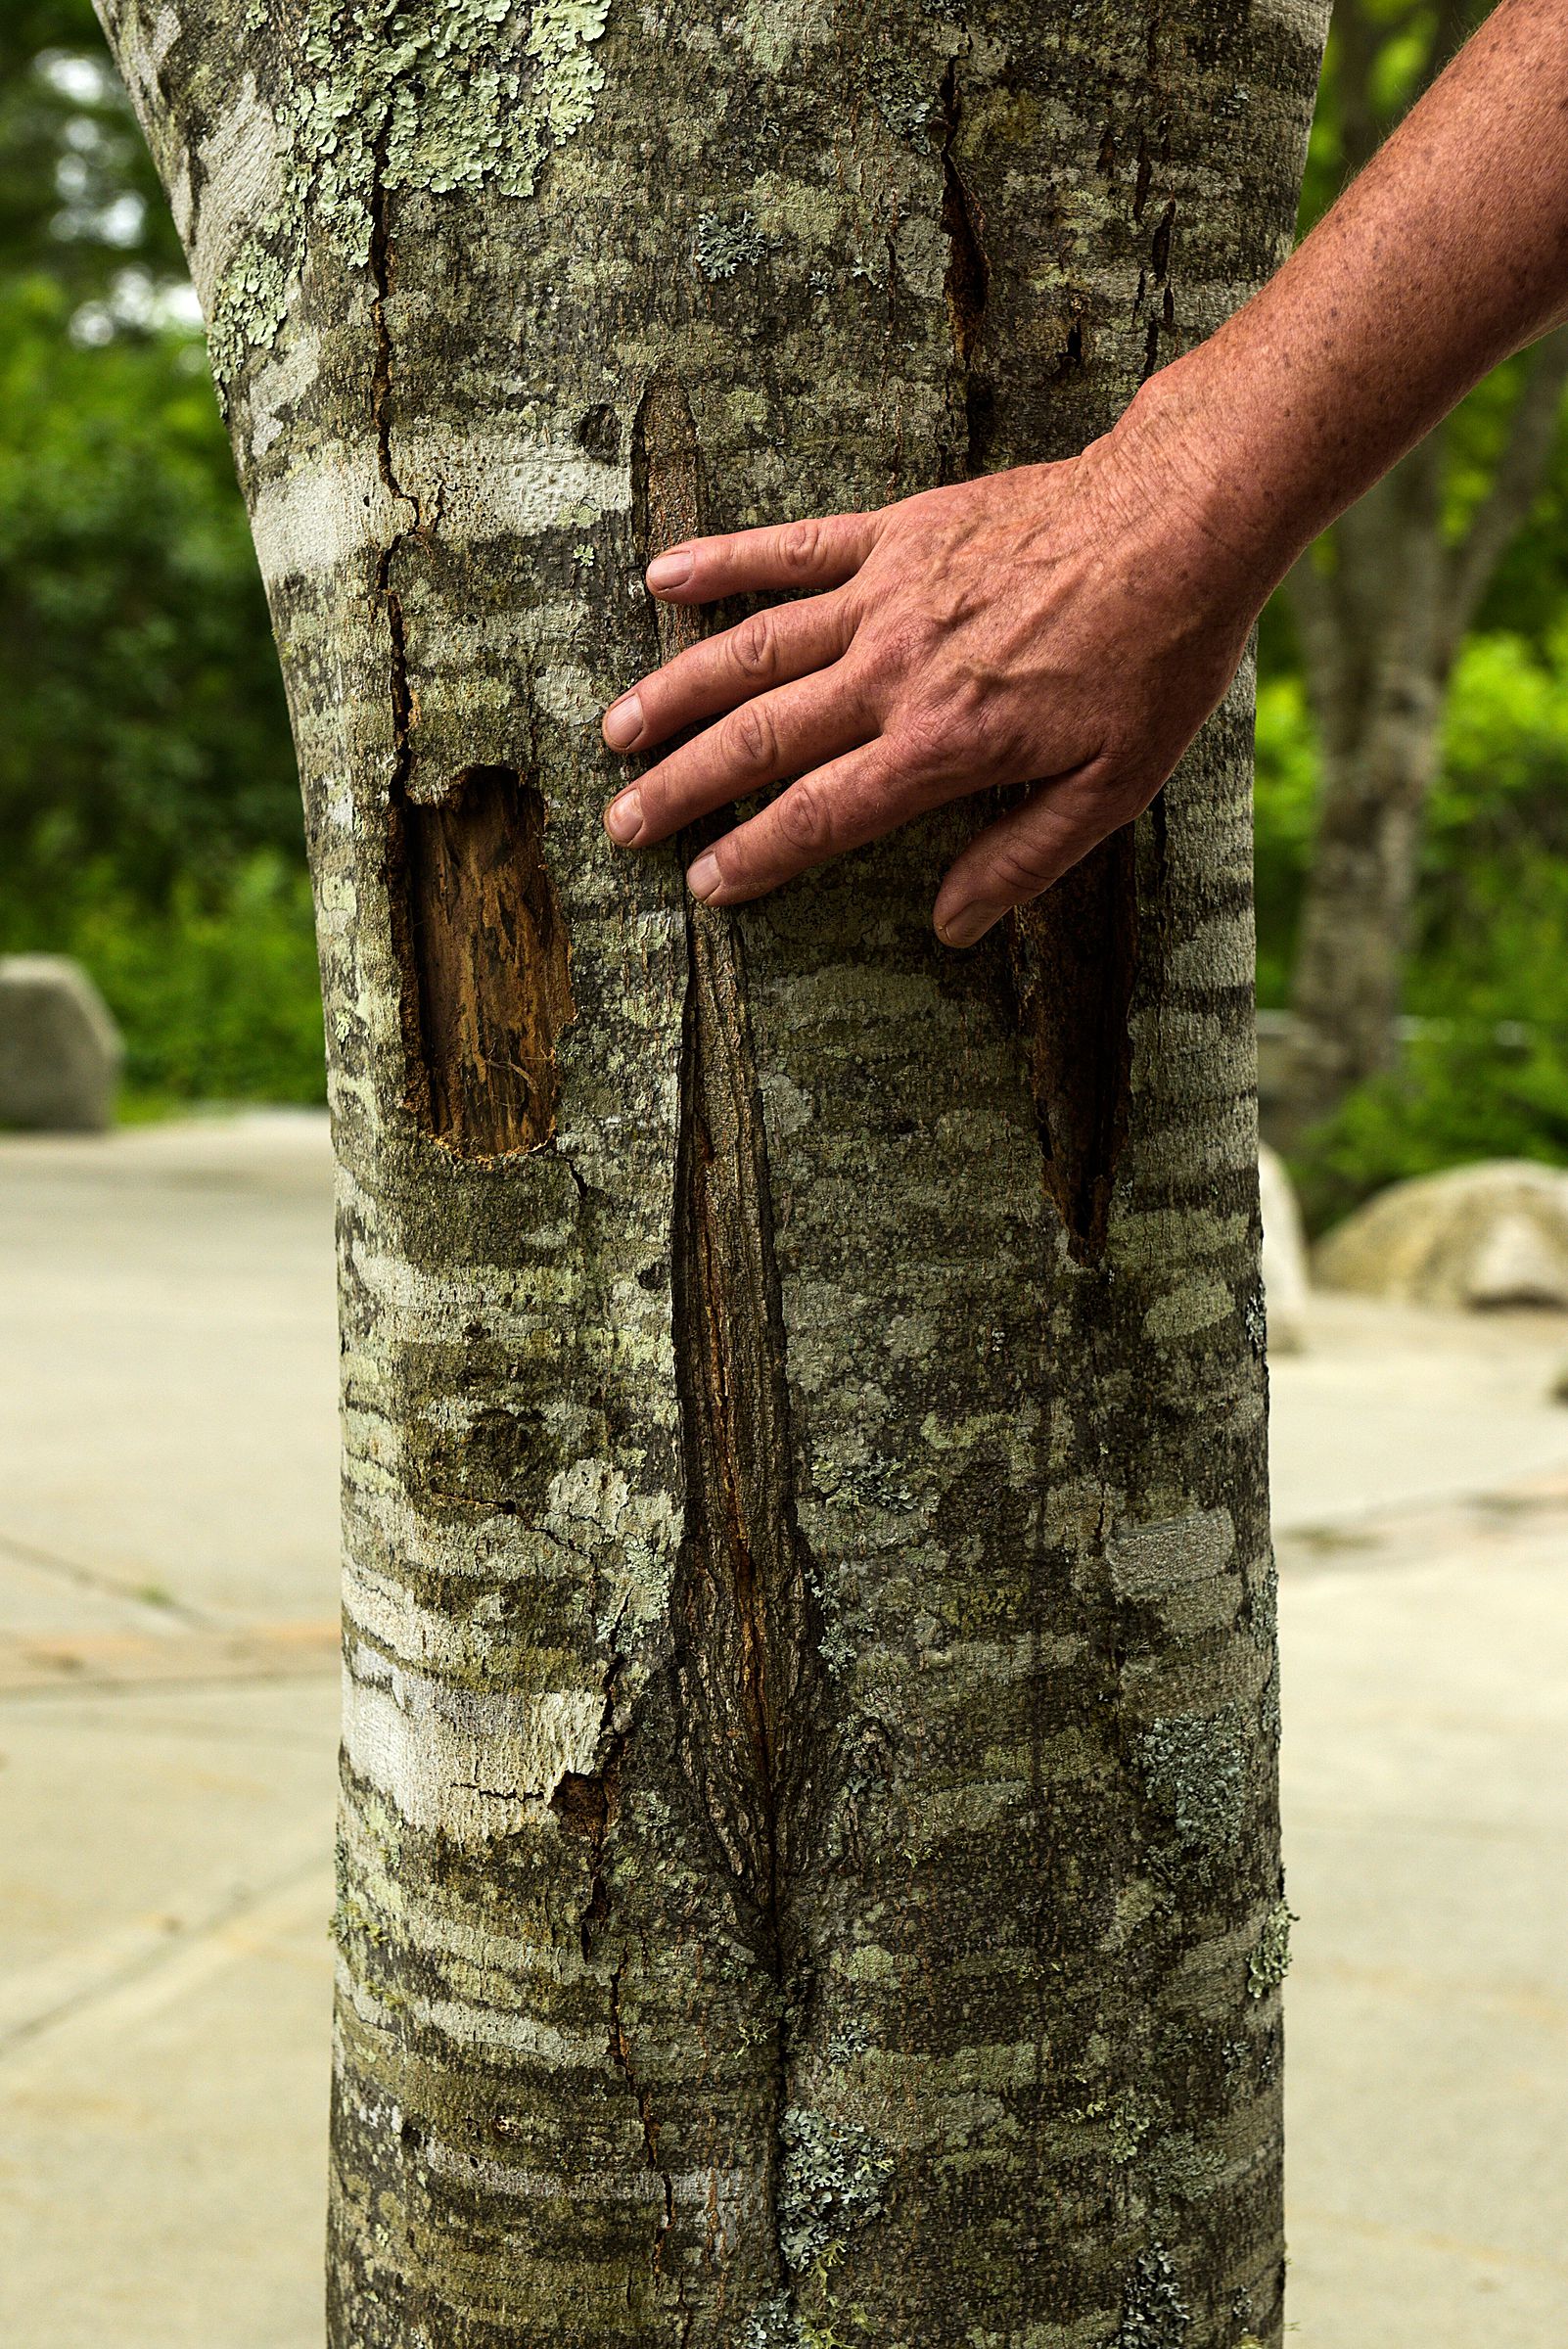 Anne Fayen, of Strafford, the horticulturist and landscape designer at the Montshire Museum, stops to touch the wounds in the bark of a yellowwood tree on the museum's patio in Norwich, Vt., Friday, June 25, 2021. "We think of these as kind of potted plants," she said of the yellowwoods ringing a paved area near the building. Recently, three of the trees were removed to allow others  more access to nutrients in their limited space. (Valley News - James M. Patterson) Copyright Valley News. May not be reprinted or used online without permission. Send requests to permission@vnews.com.